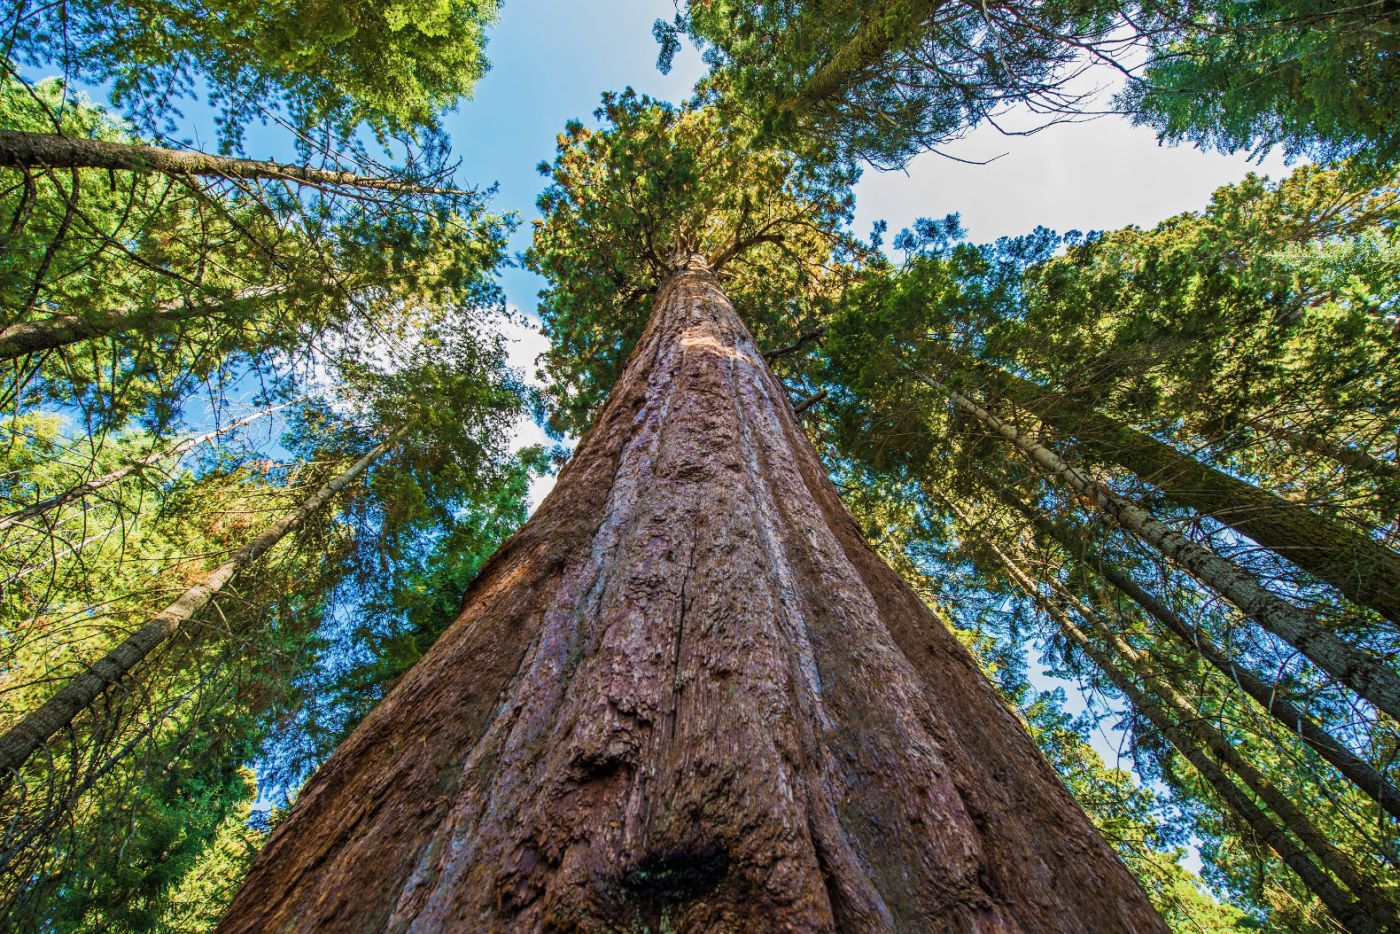 Hyperion is the Tallest Tree and it is a Coast Redwood